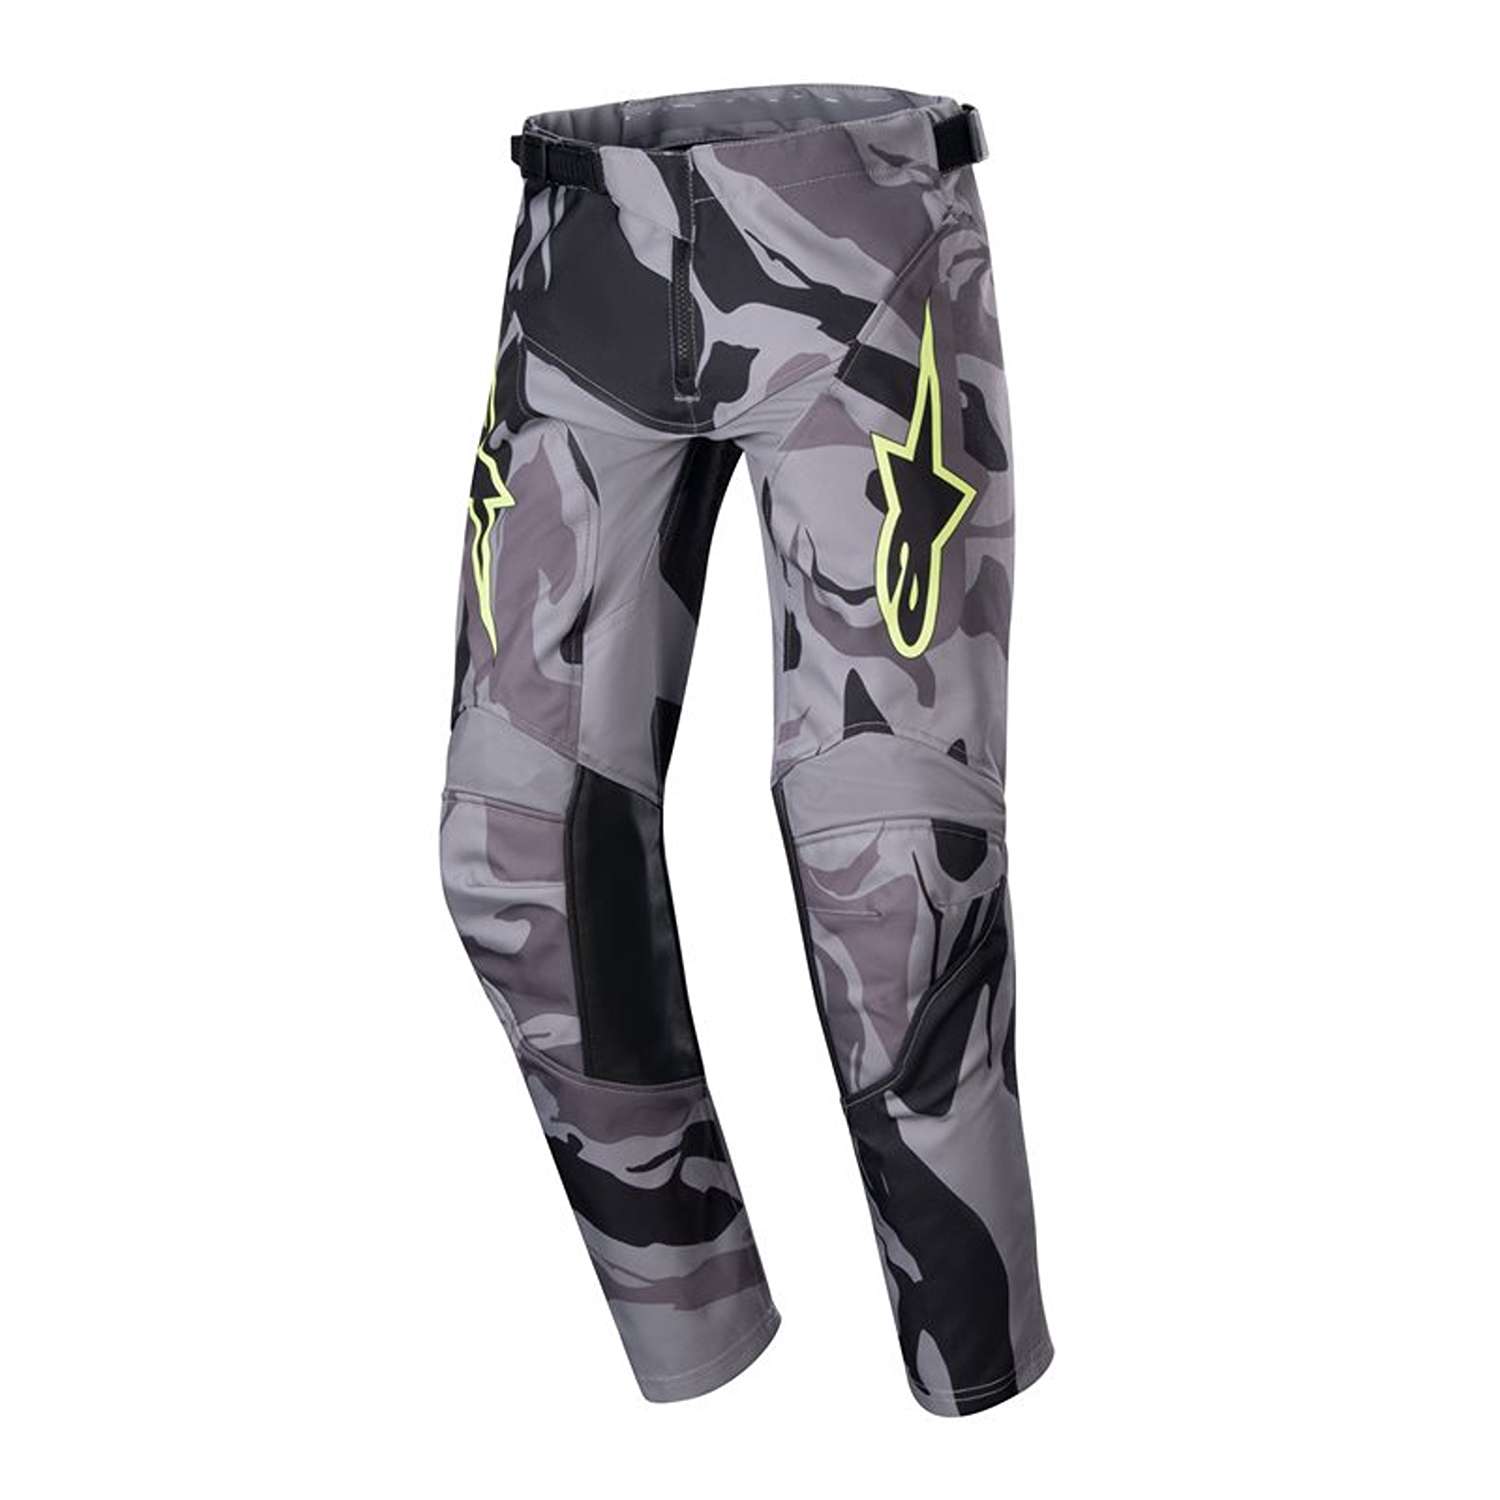 Image of Alpinestars Youth Racer Tactical Pants Cast Gray Camo Magnet Talla 26